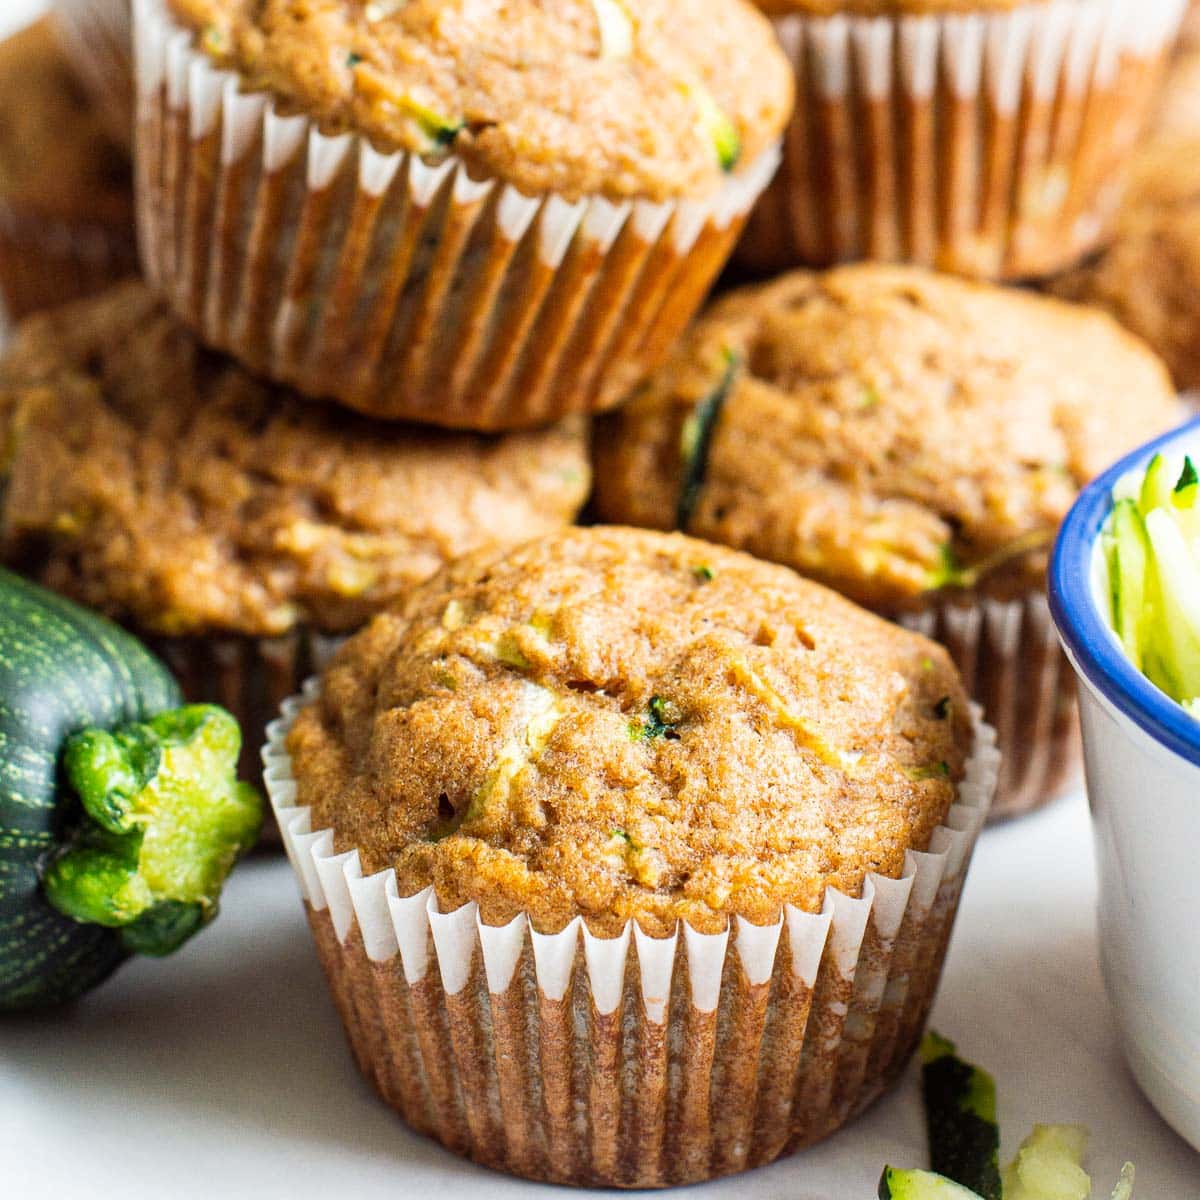 Easy Healthy Zucchini Muffins with Applesauce